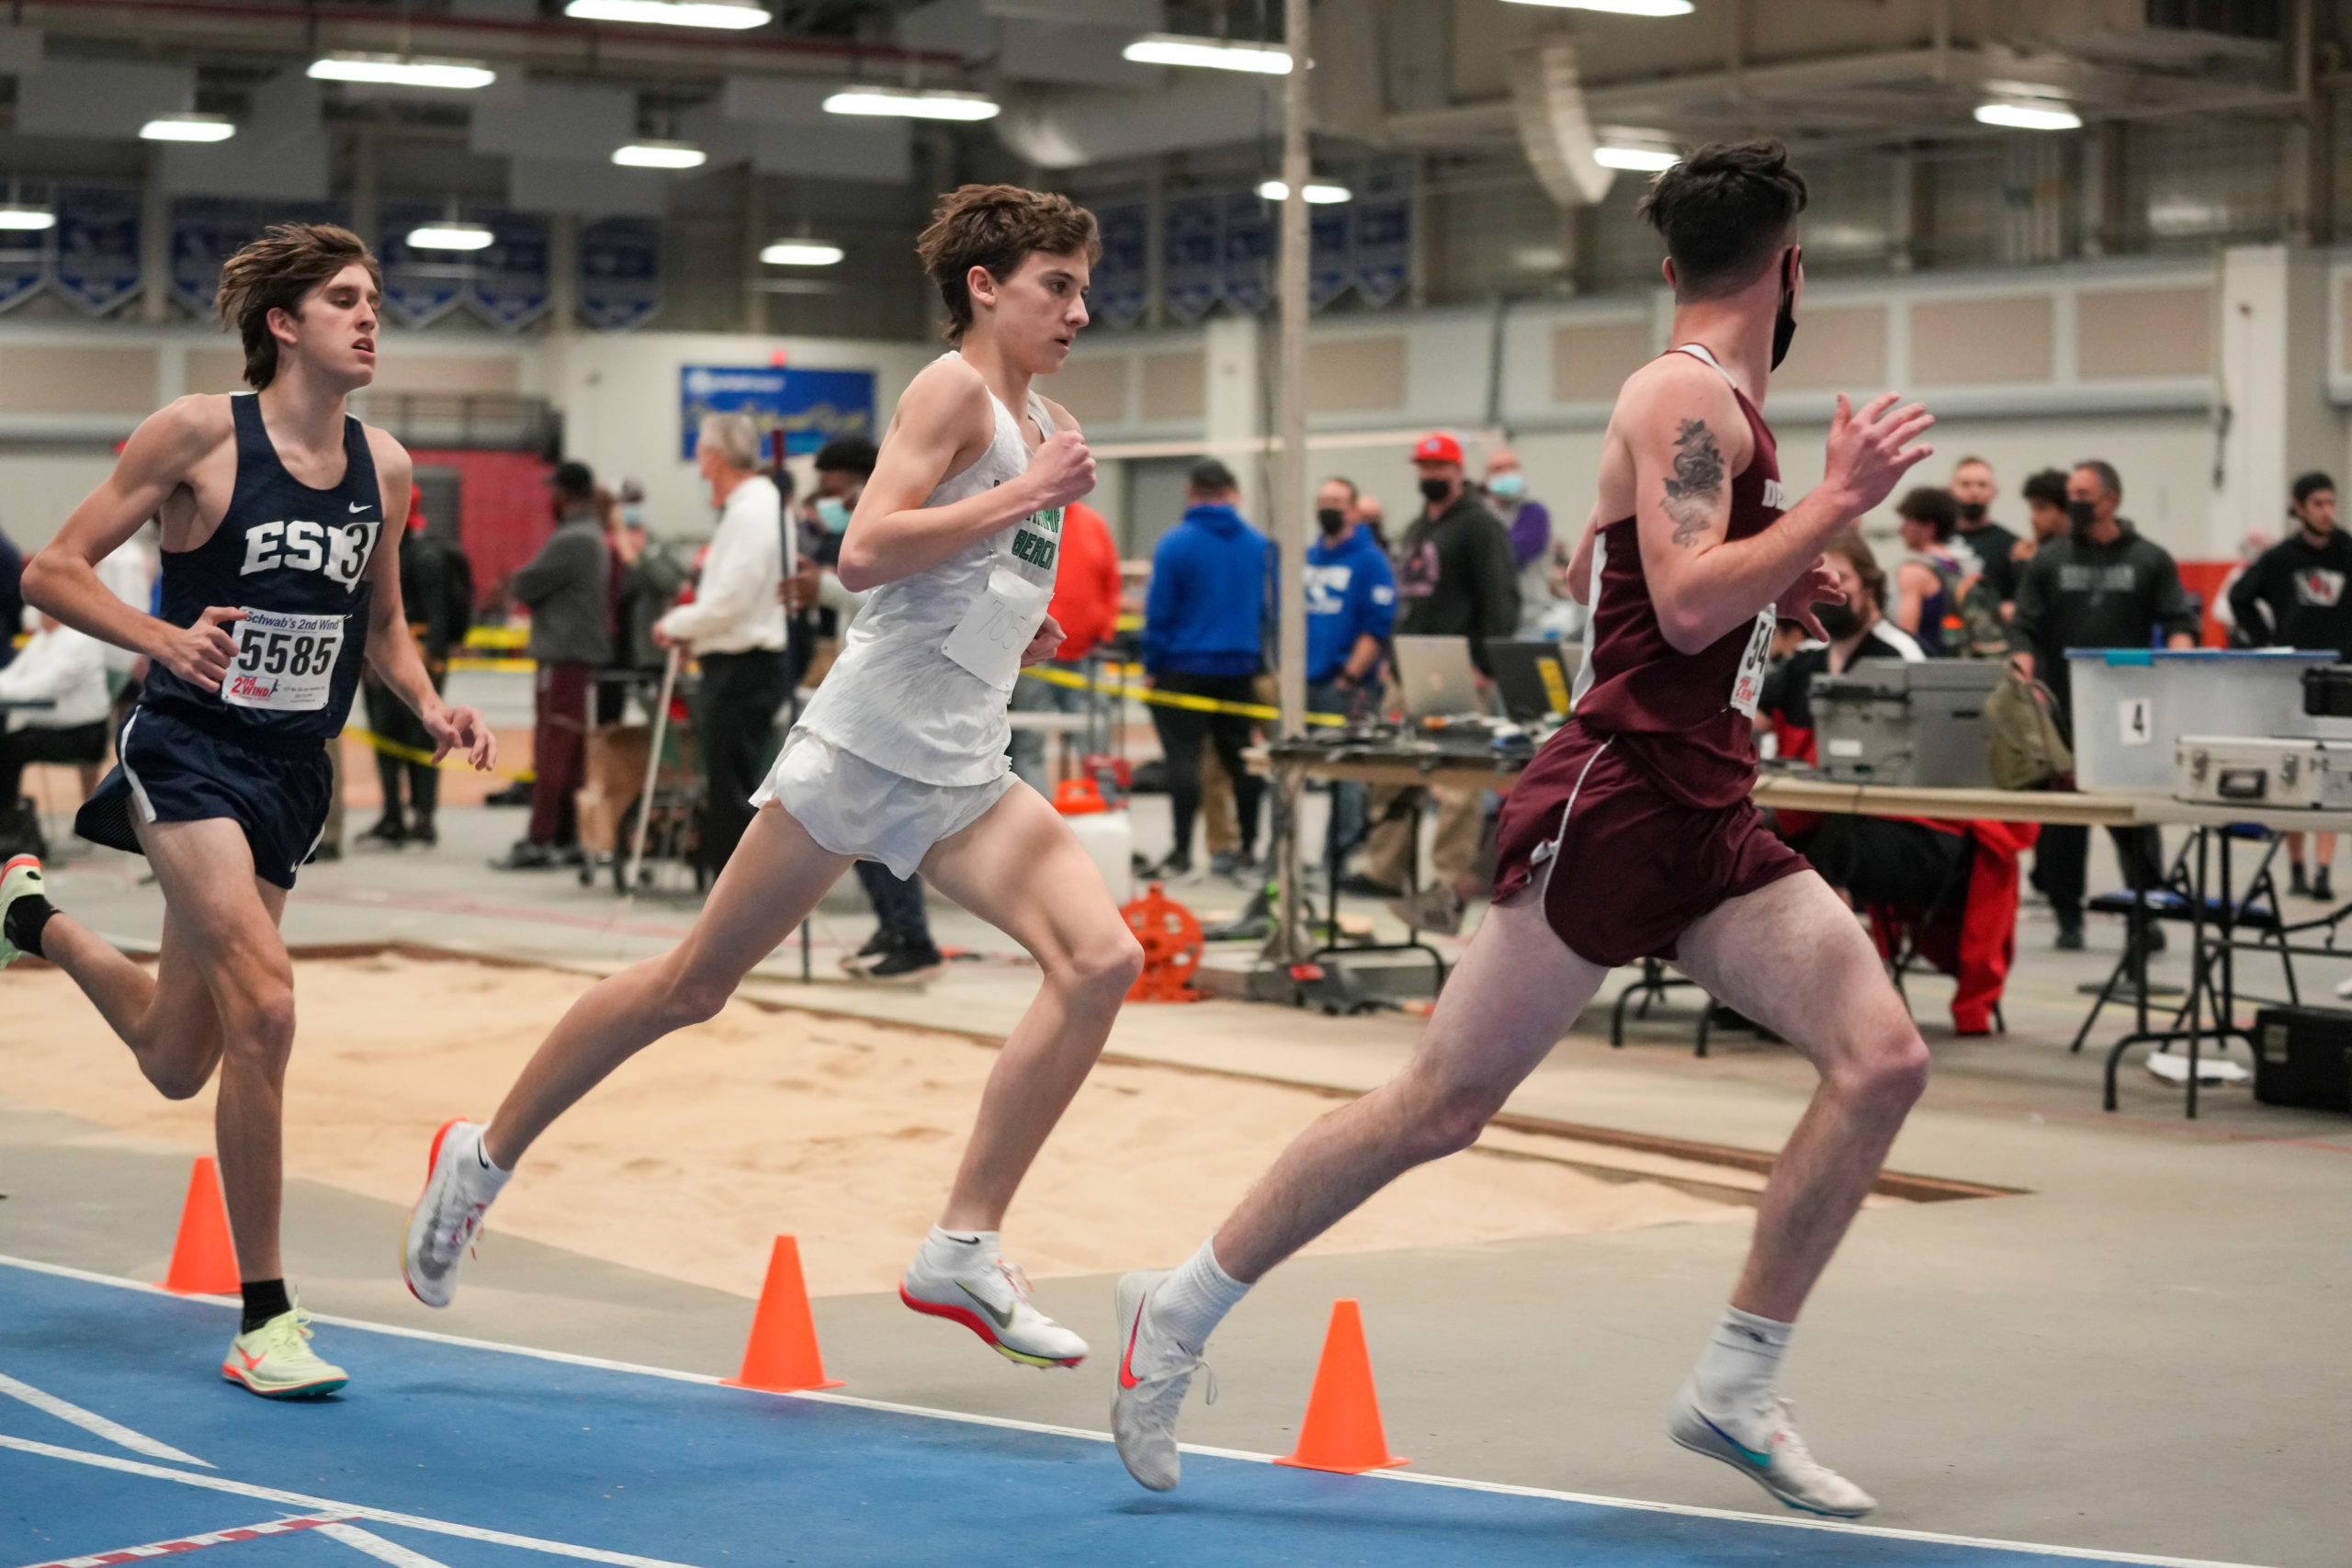 Westhampton Beach junior Trevor Hayes qualified for states in the 1,600-meter race.